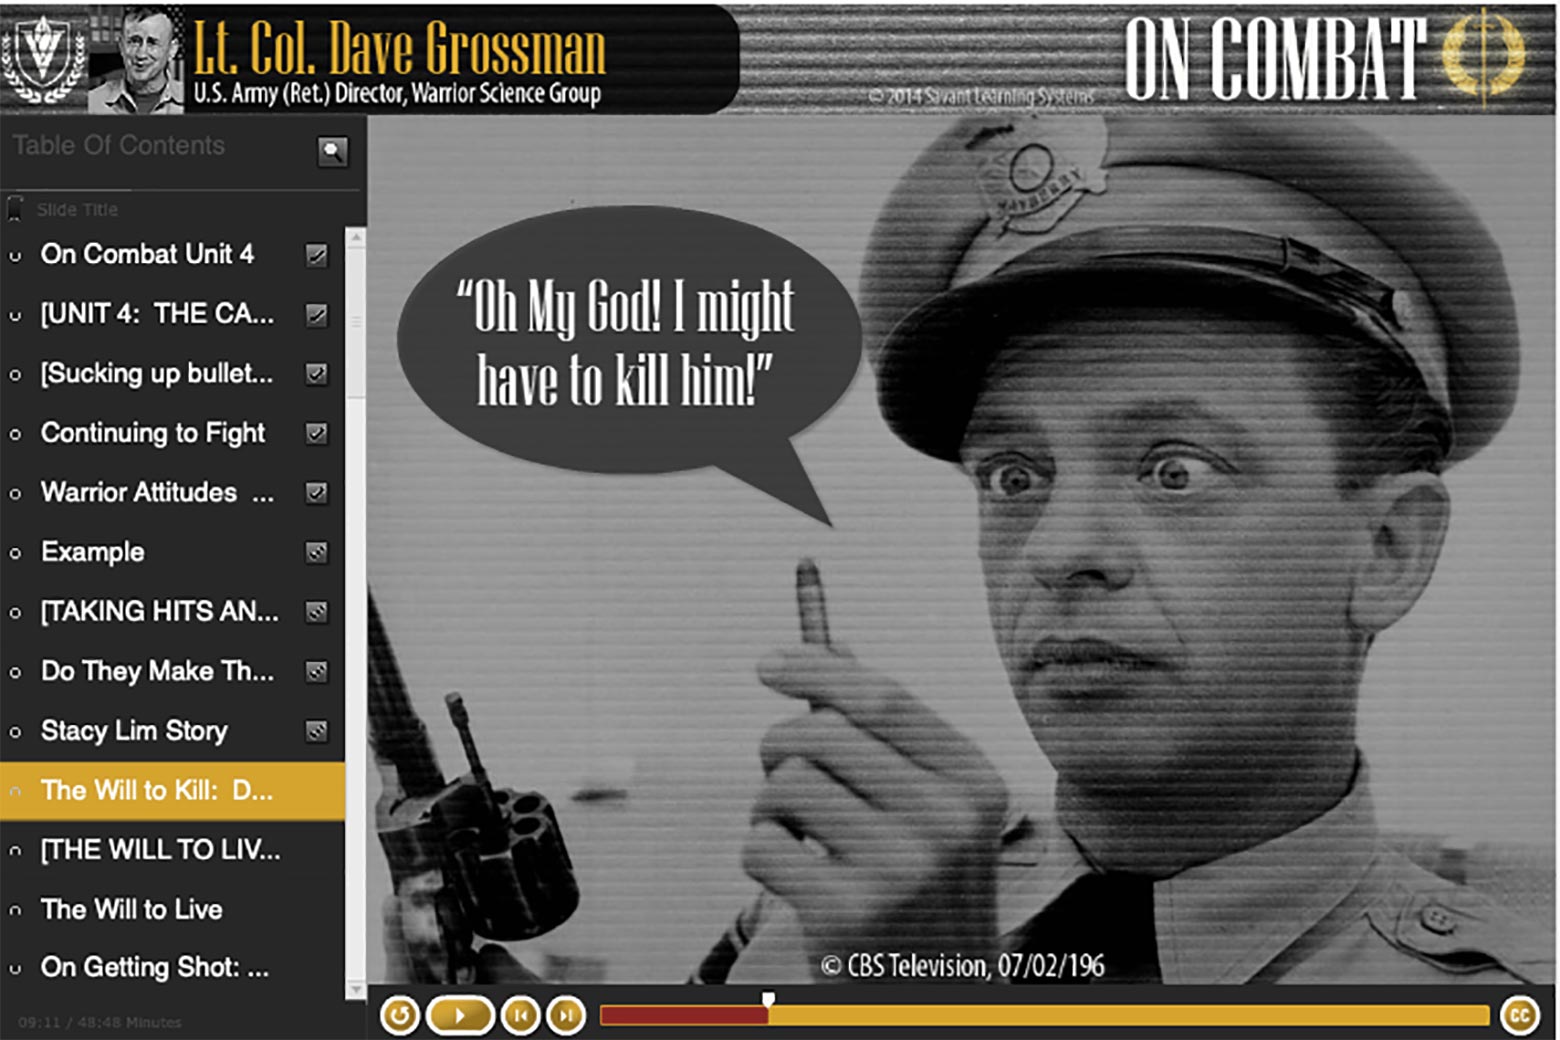 A picture of Barney Fife holding a bullet with a speech bubble that says, "Oh My God! I might have to kill him!"